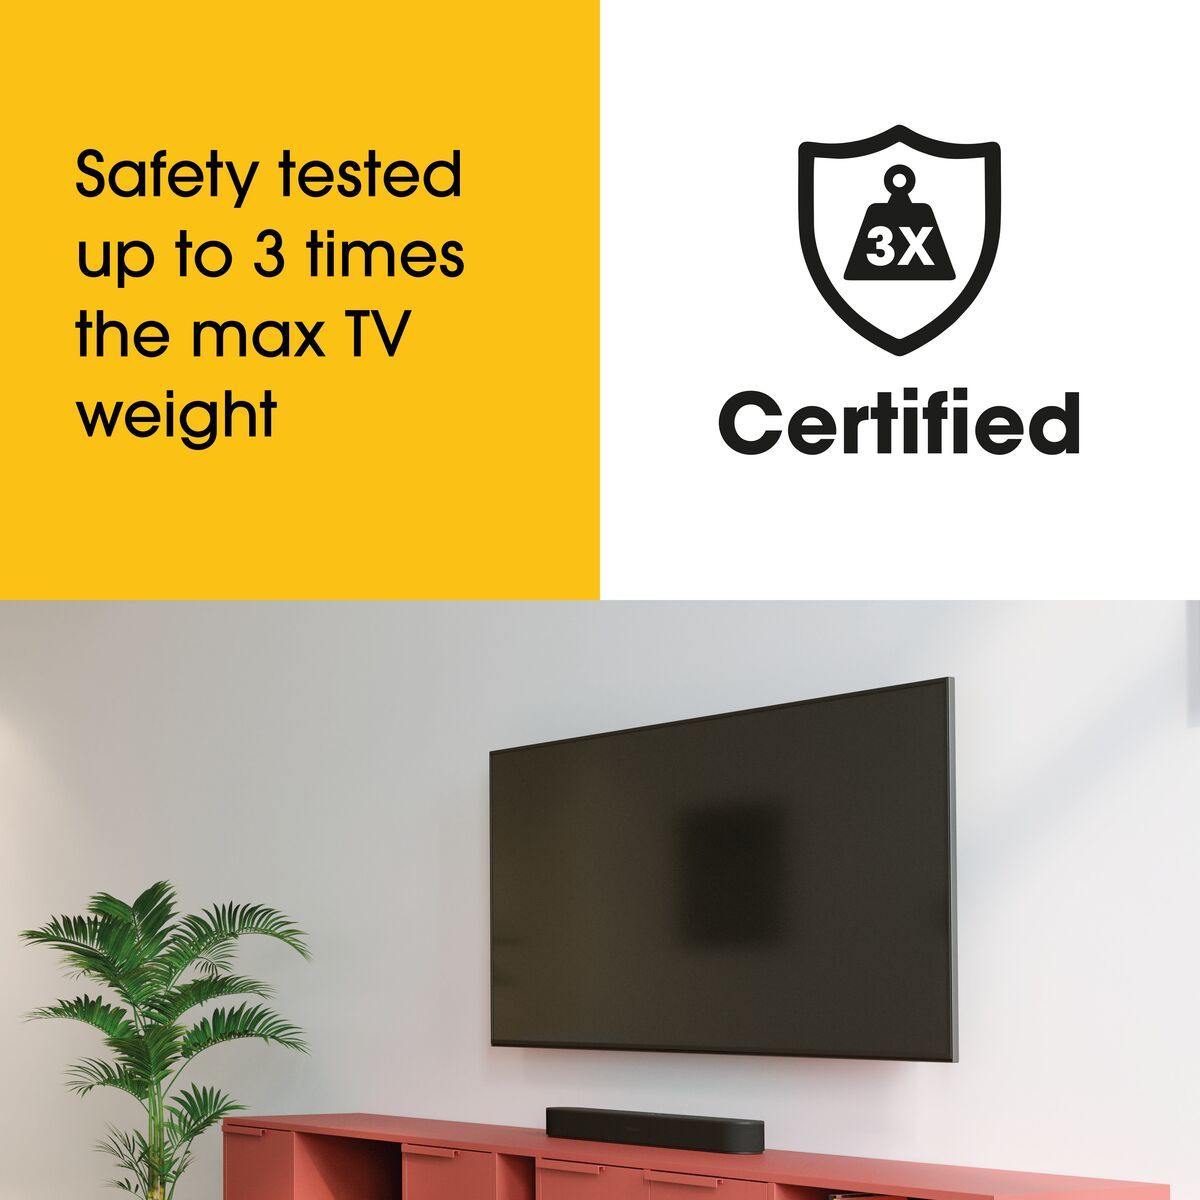 Vogel's MA 2040 Full-Motion TV Wall Mount - Suitable for 19 up to 43 inch TVs - Full motion (up to 180°) - Tilt up to 10° - USP